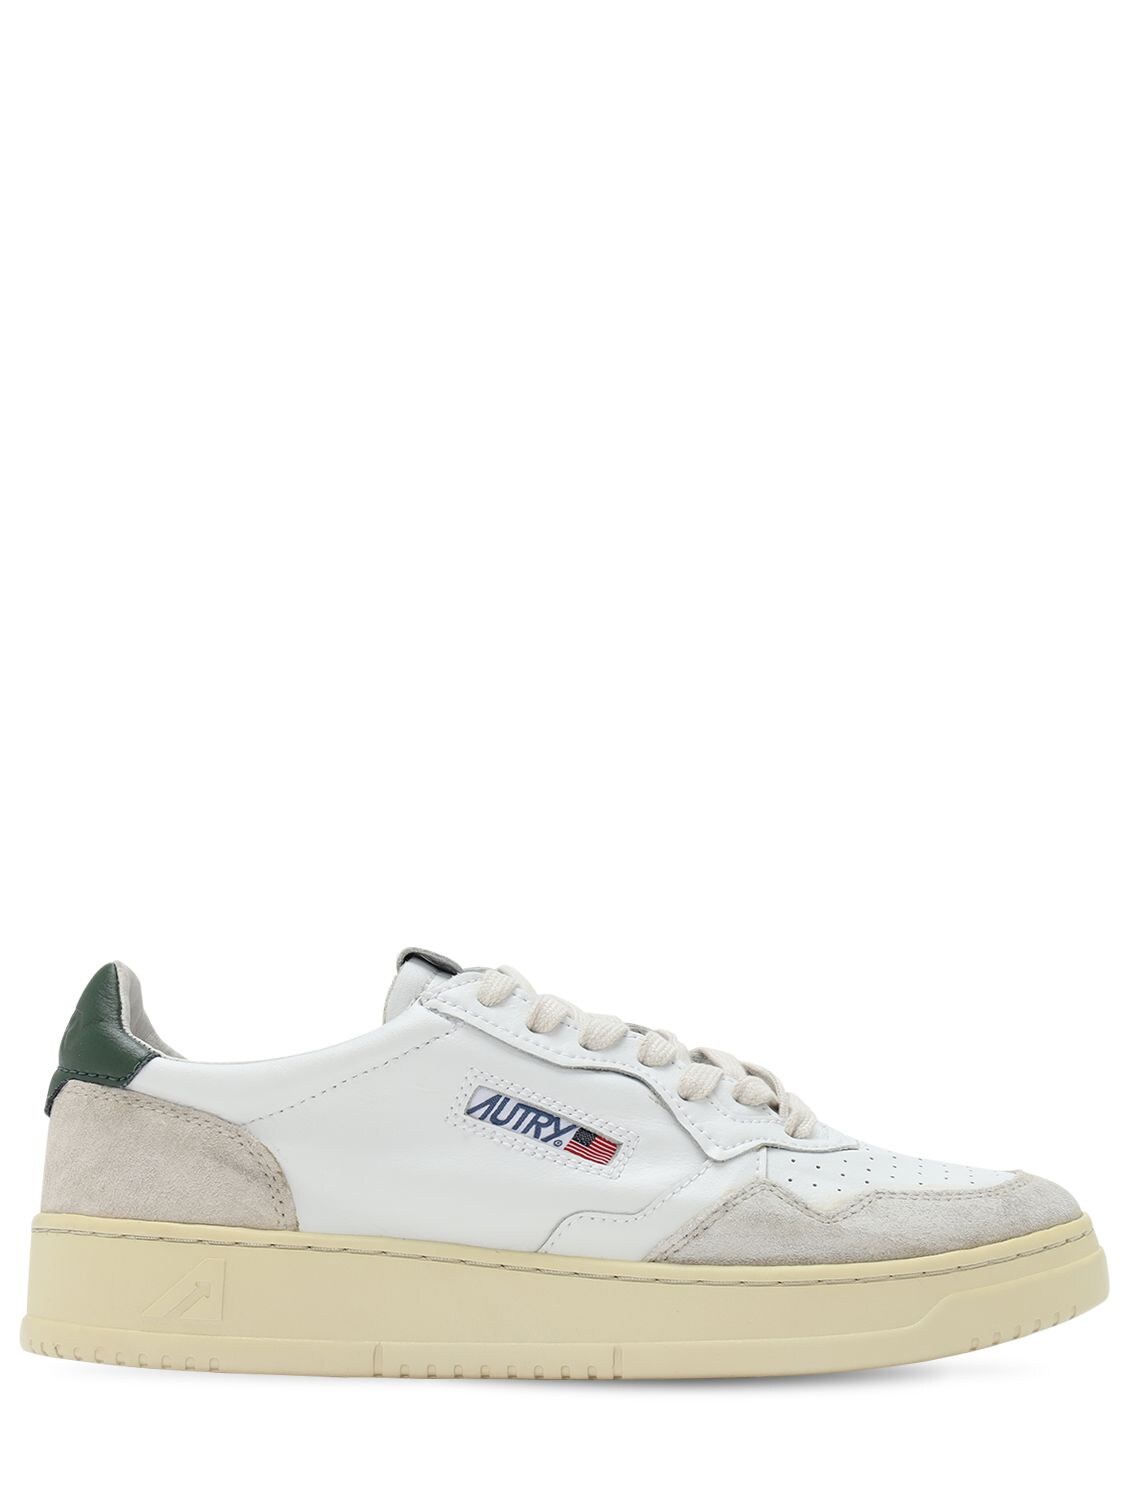 AUTRY Leather & Suede Low Sneakers from LUISAVIAROMA.COM | Daily Mail